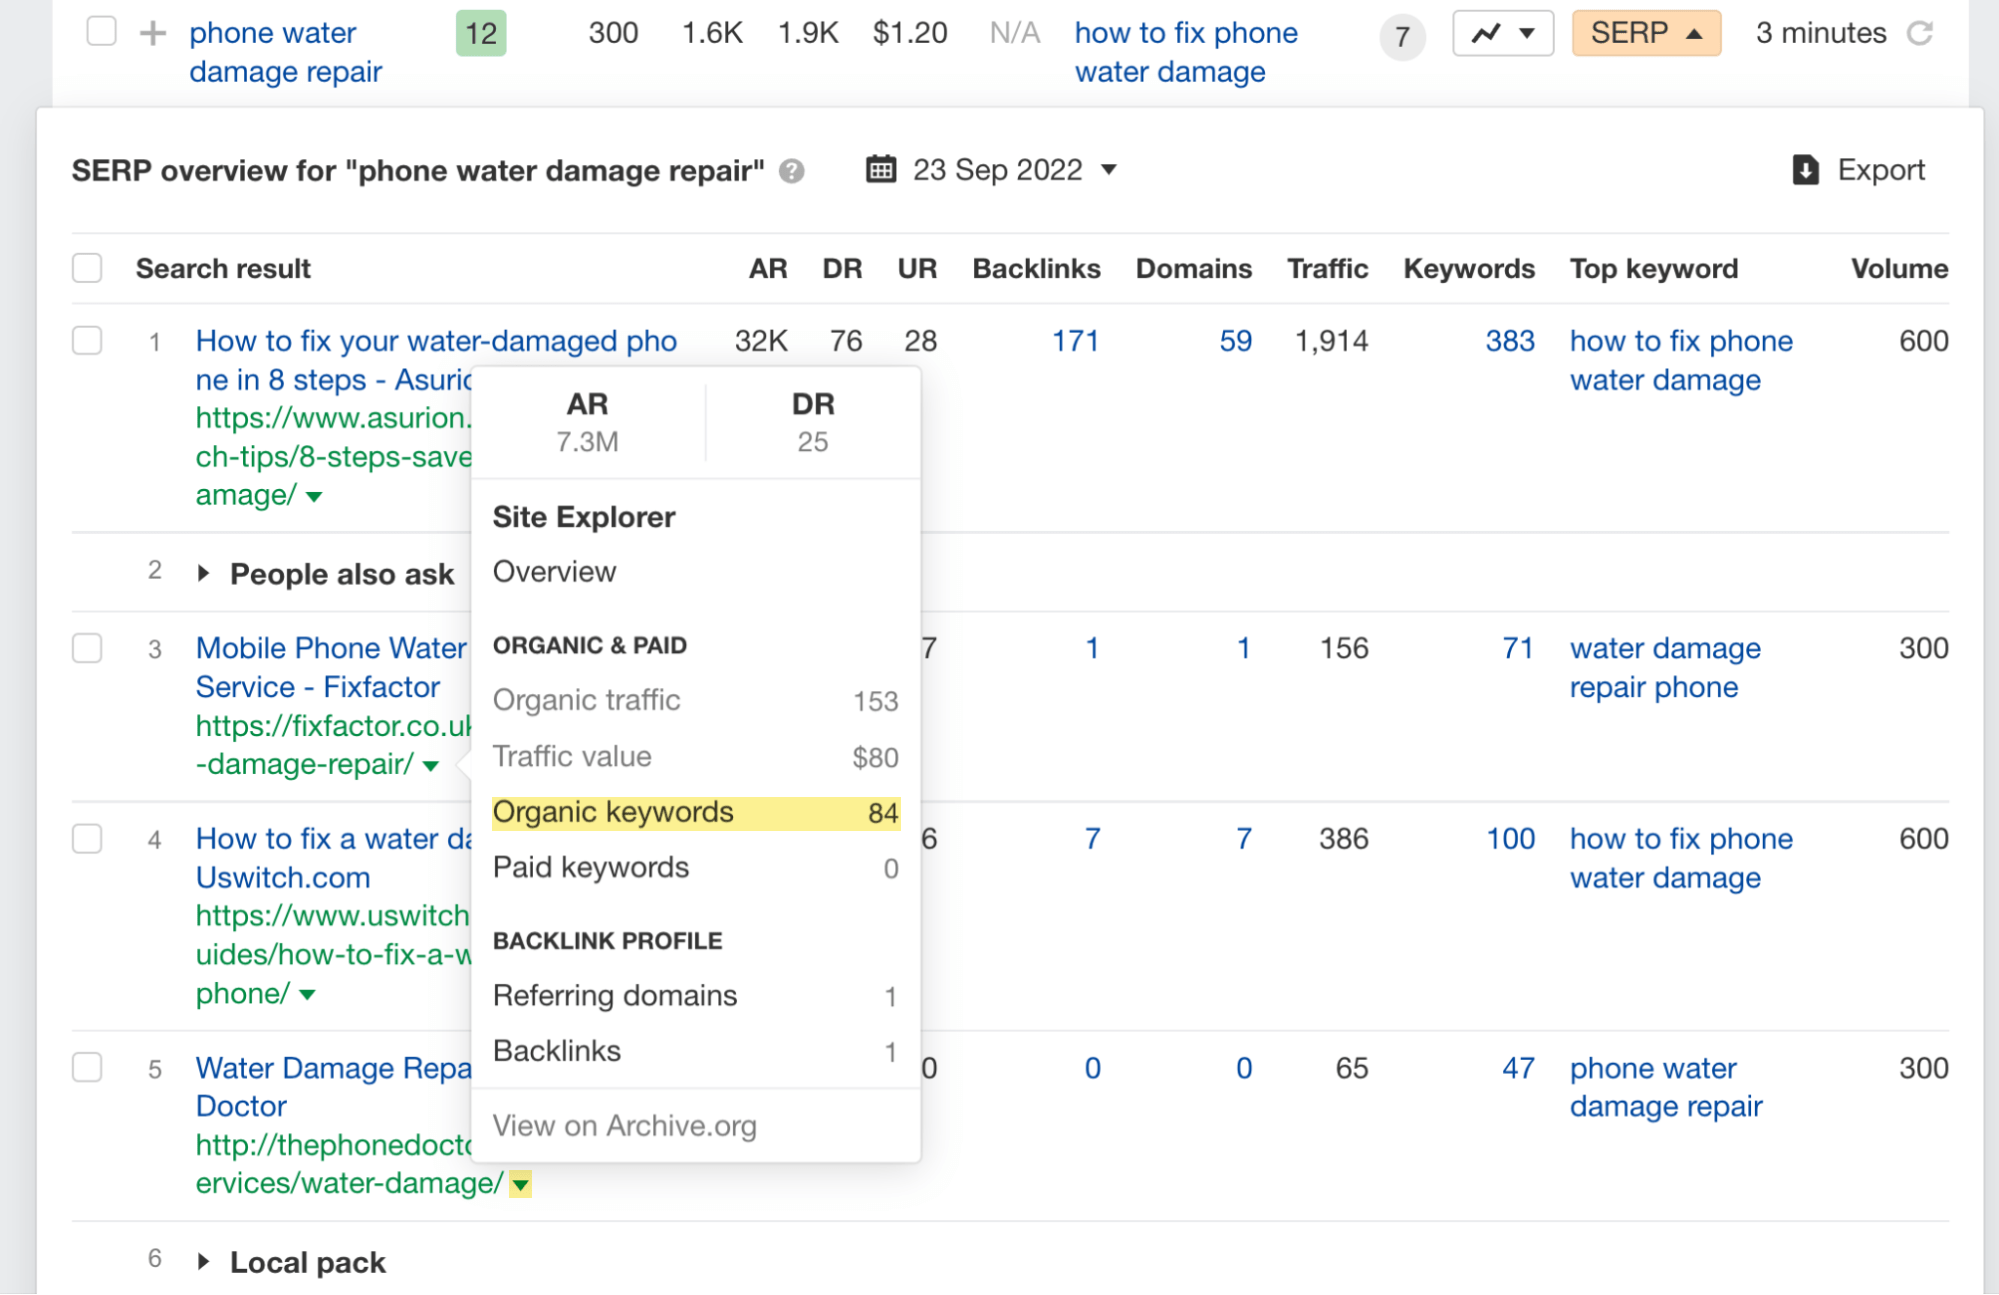 Clicking on the caret in the SERP overview leads to other reports